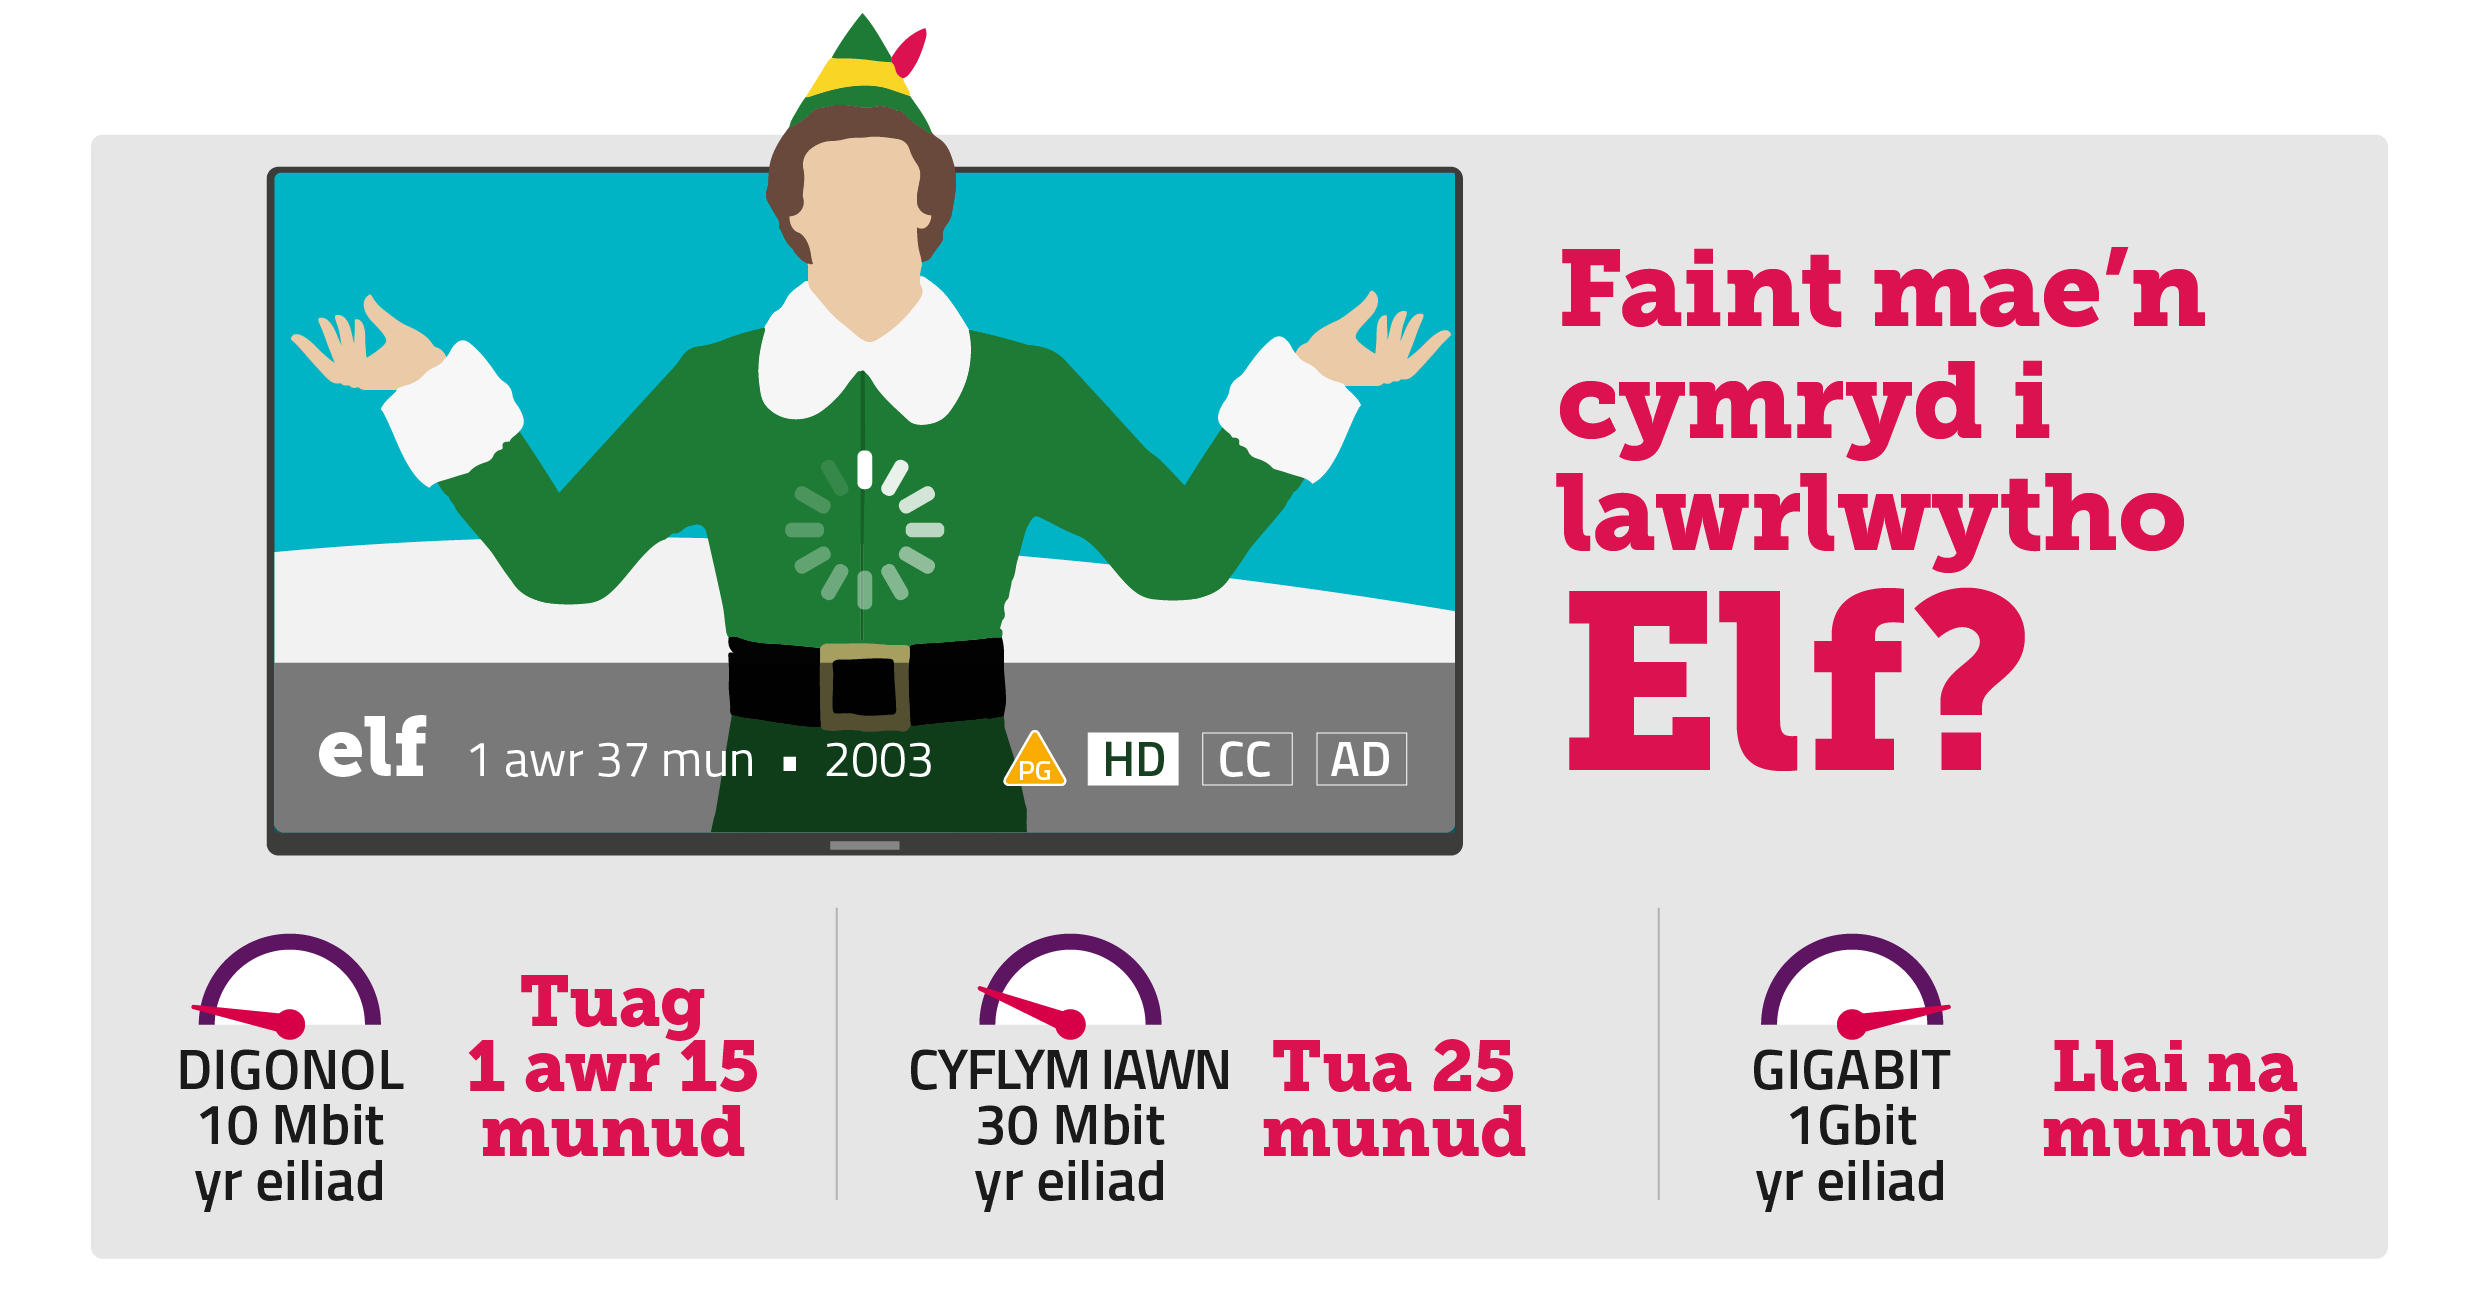 How long does it take to download Elf?